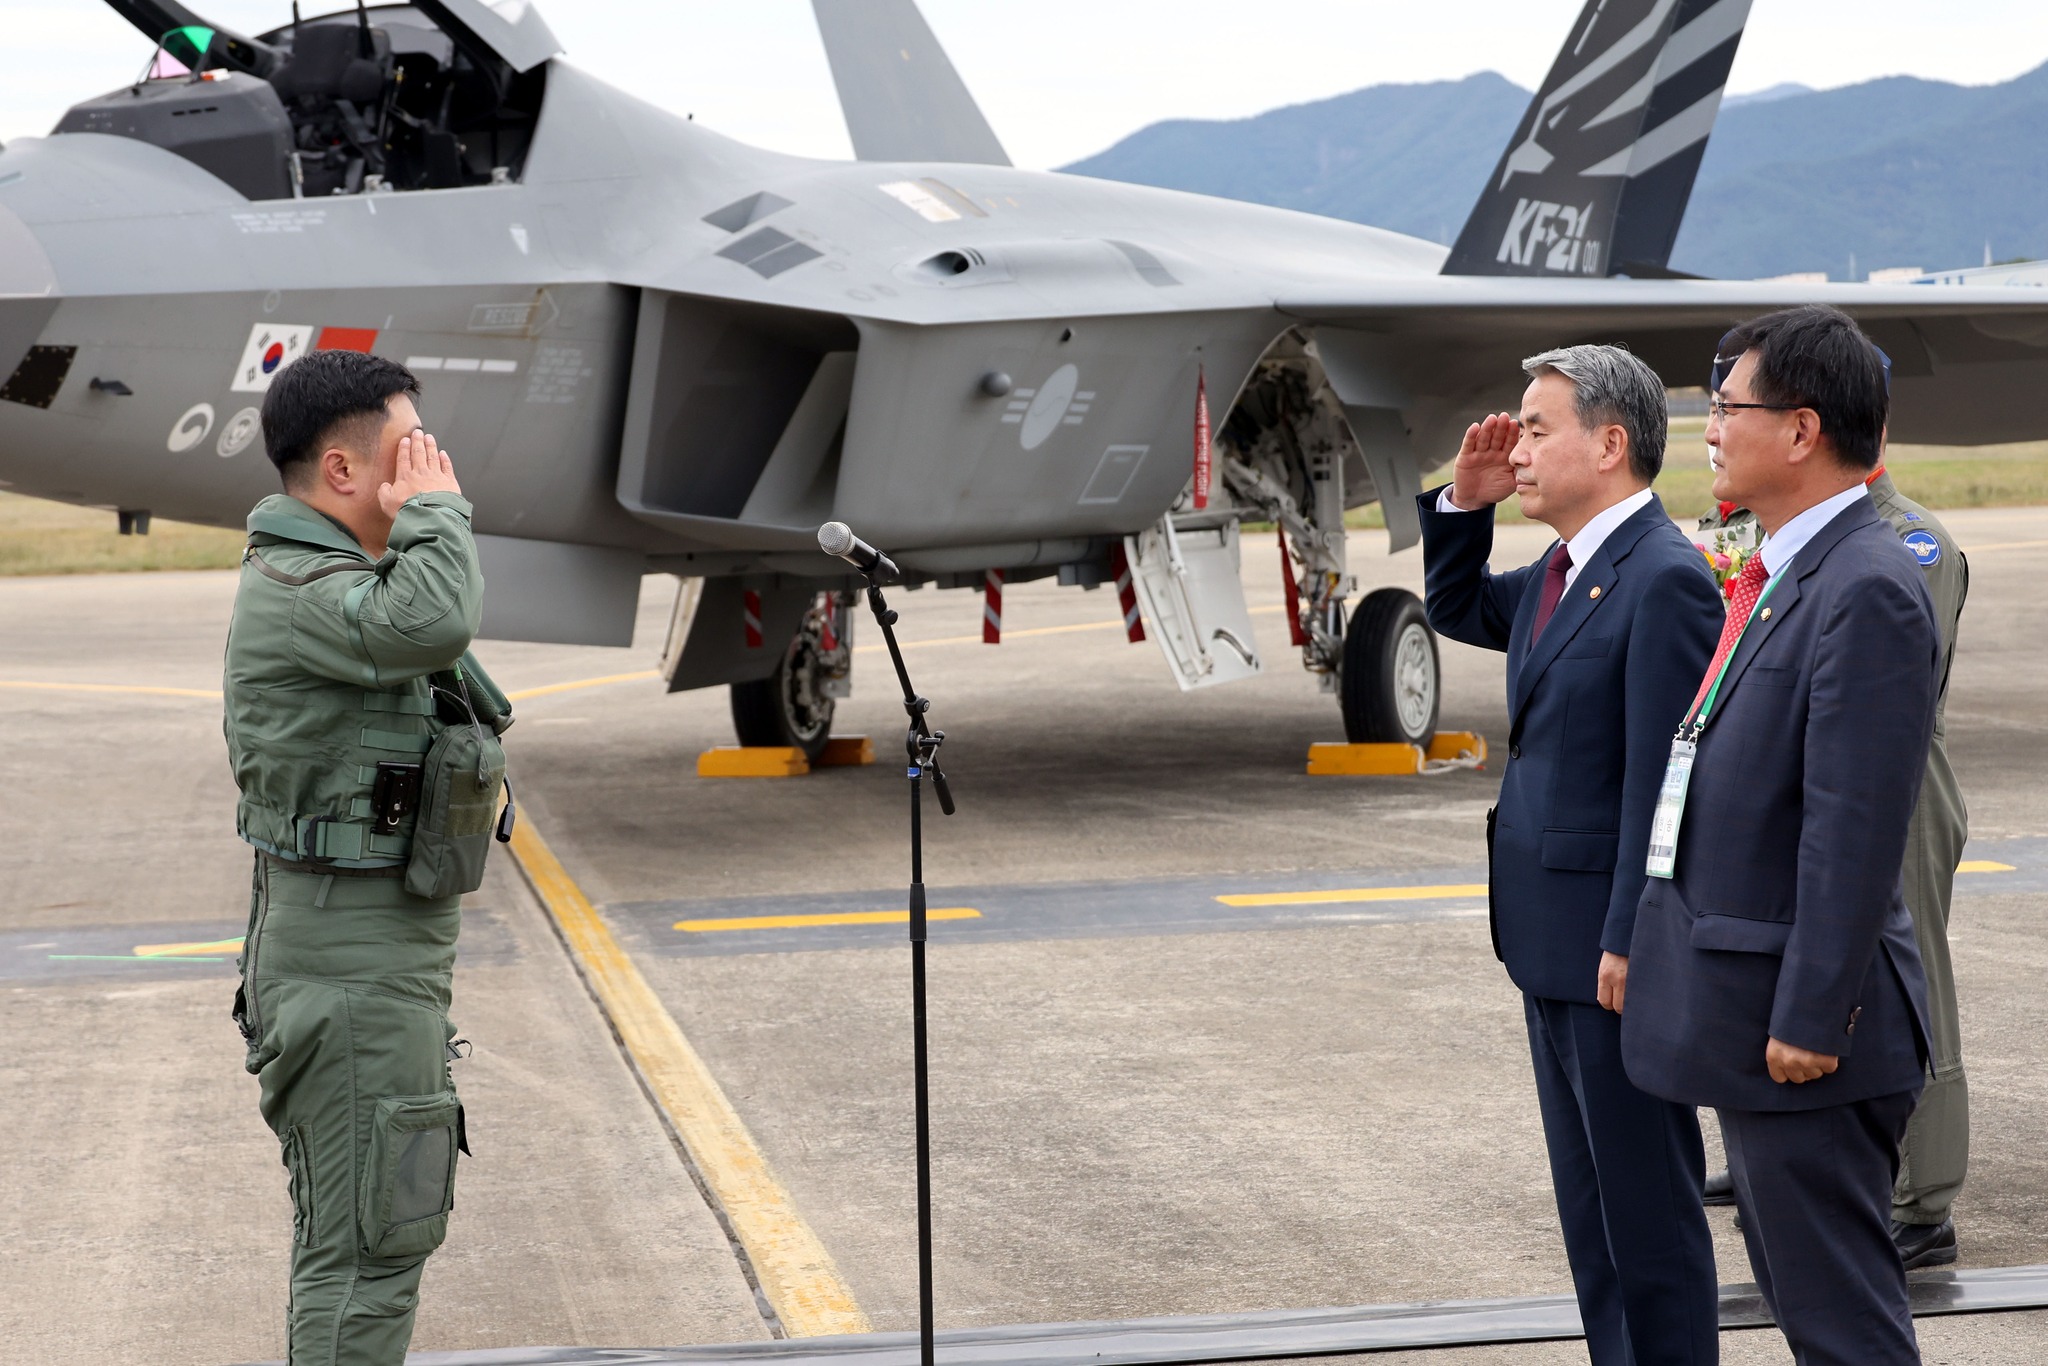 Maj. Ahn Jun-hyun (left) of the Republic of Korea Air Force, who piloted the No. 1 prototype of the KF-21 fighter jet, salutes Minister of National Defense Lee Jong-Sup (second from right) after navigating the jet's first public test flight at the 3rd Flying Training Wing of Sacheon Air Force Base in Sacheon, South Gyeongsang Province.  